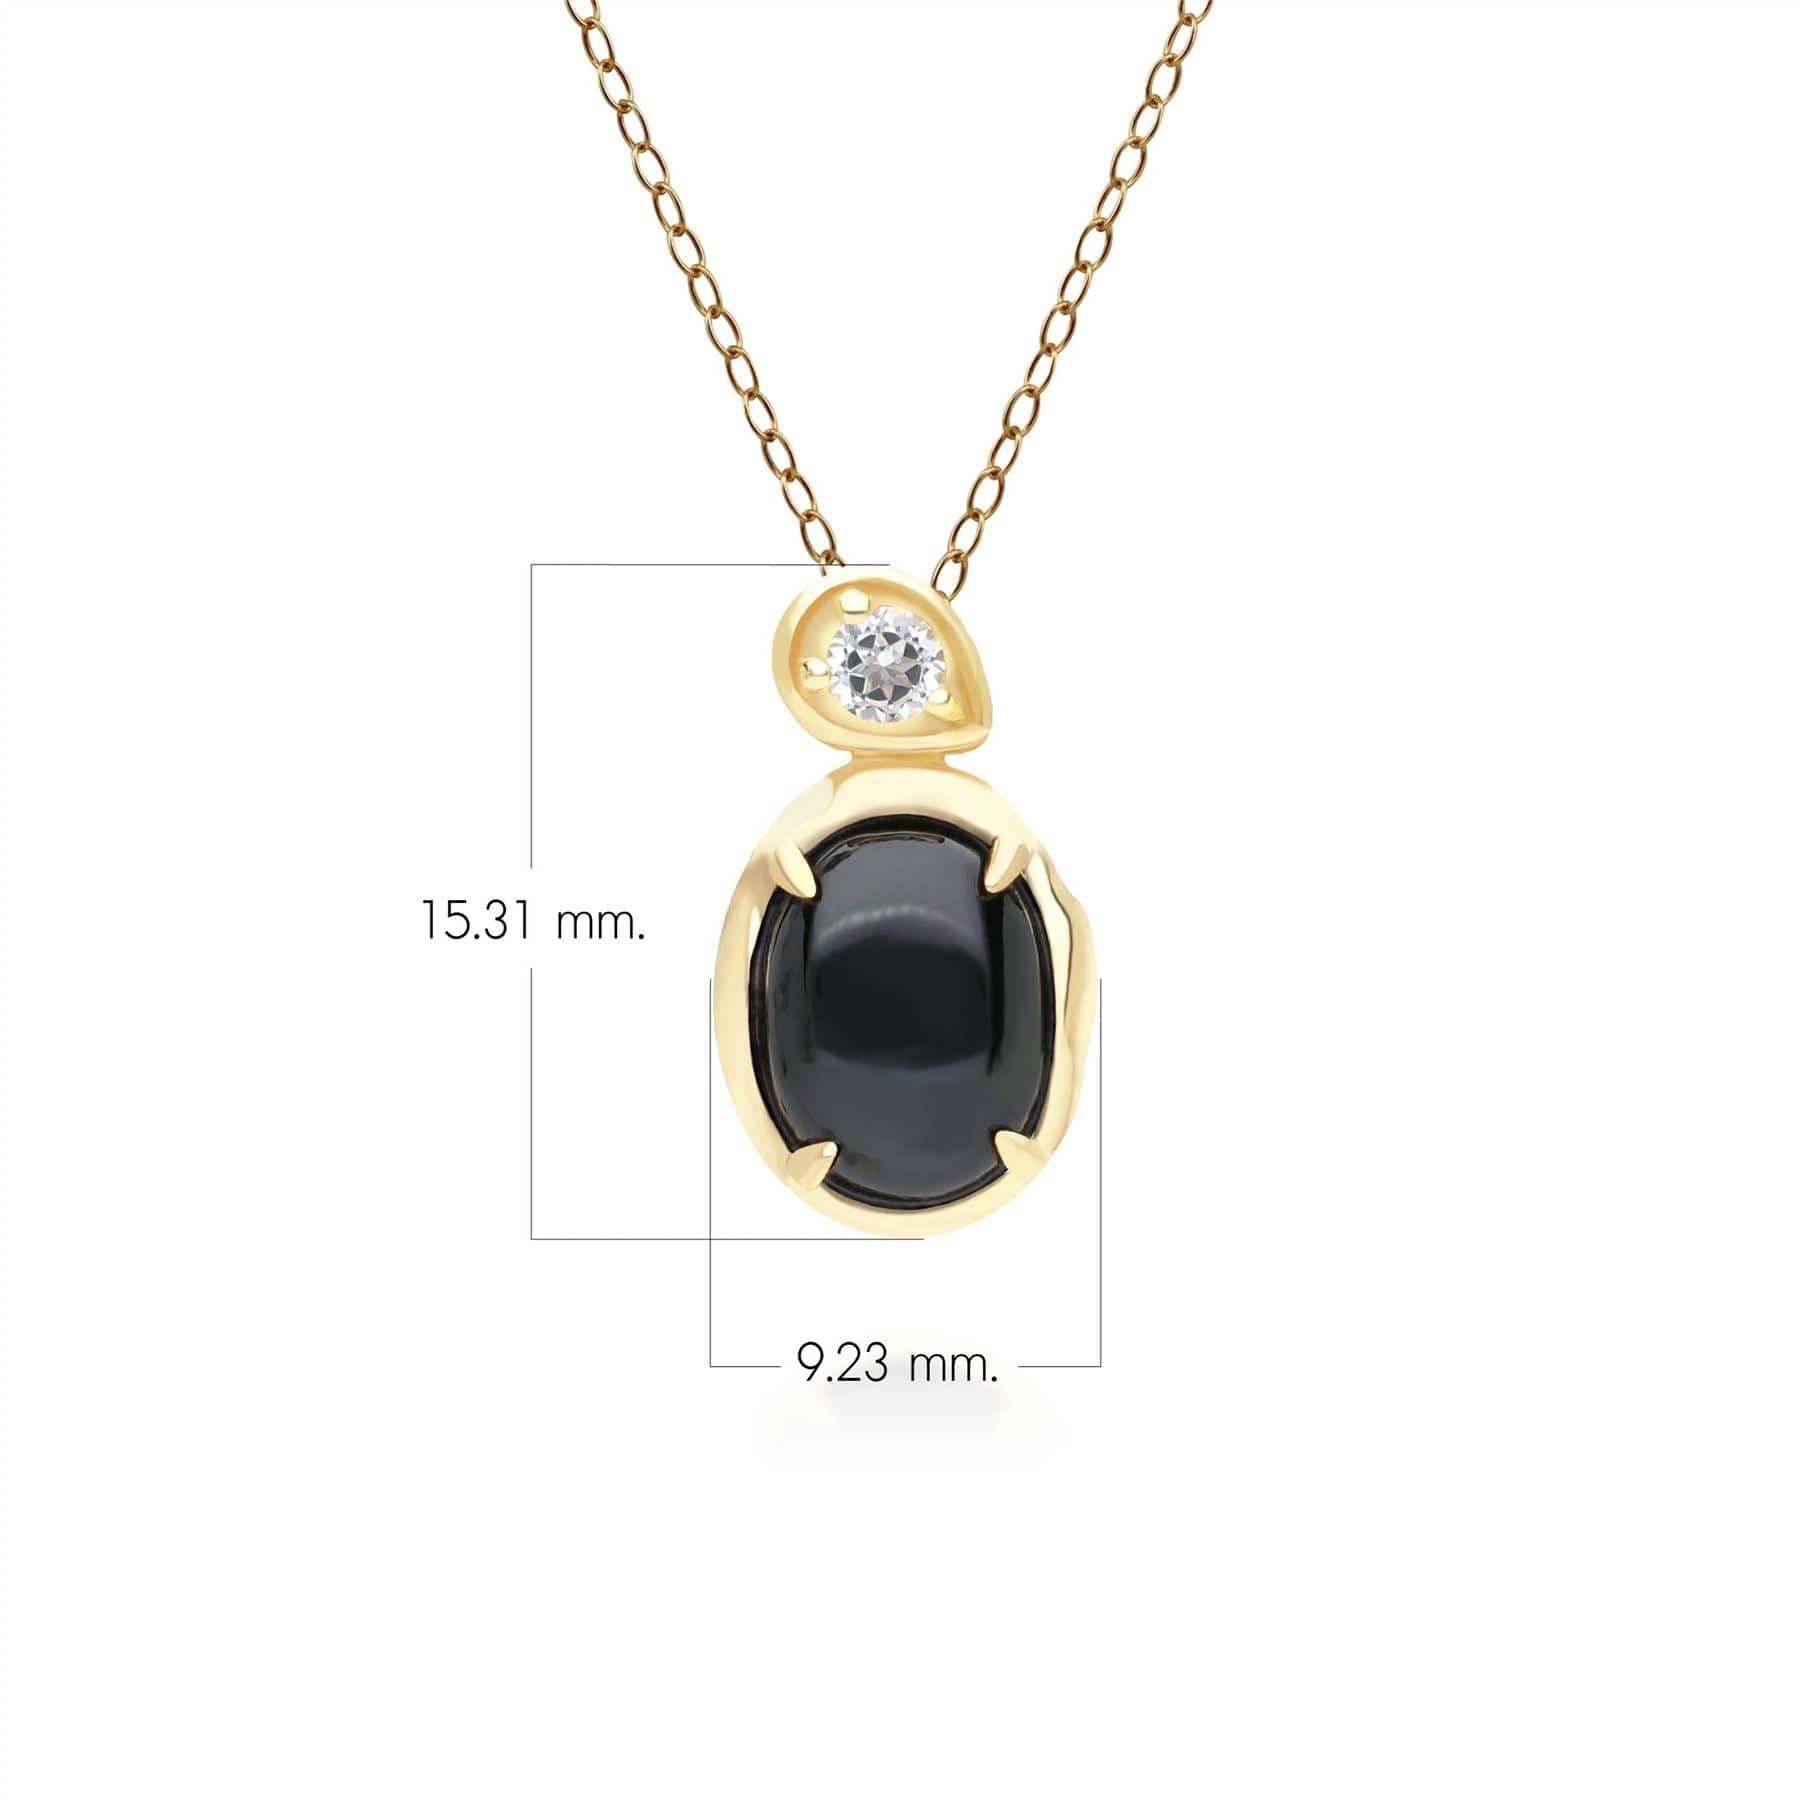 Irregular Black Onyx & Topaz Pendant In 18ct Gold Plated SterlIng Silver